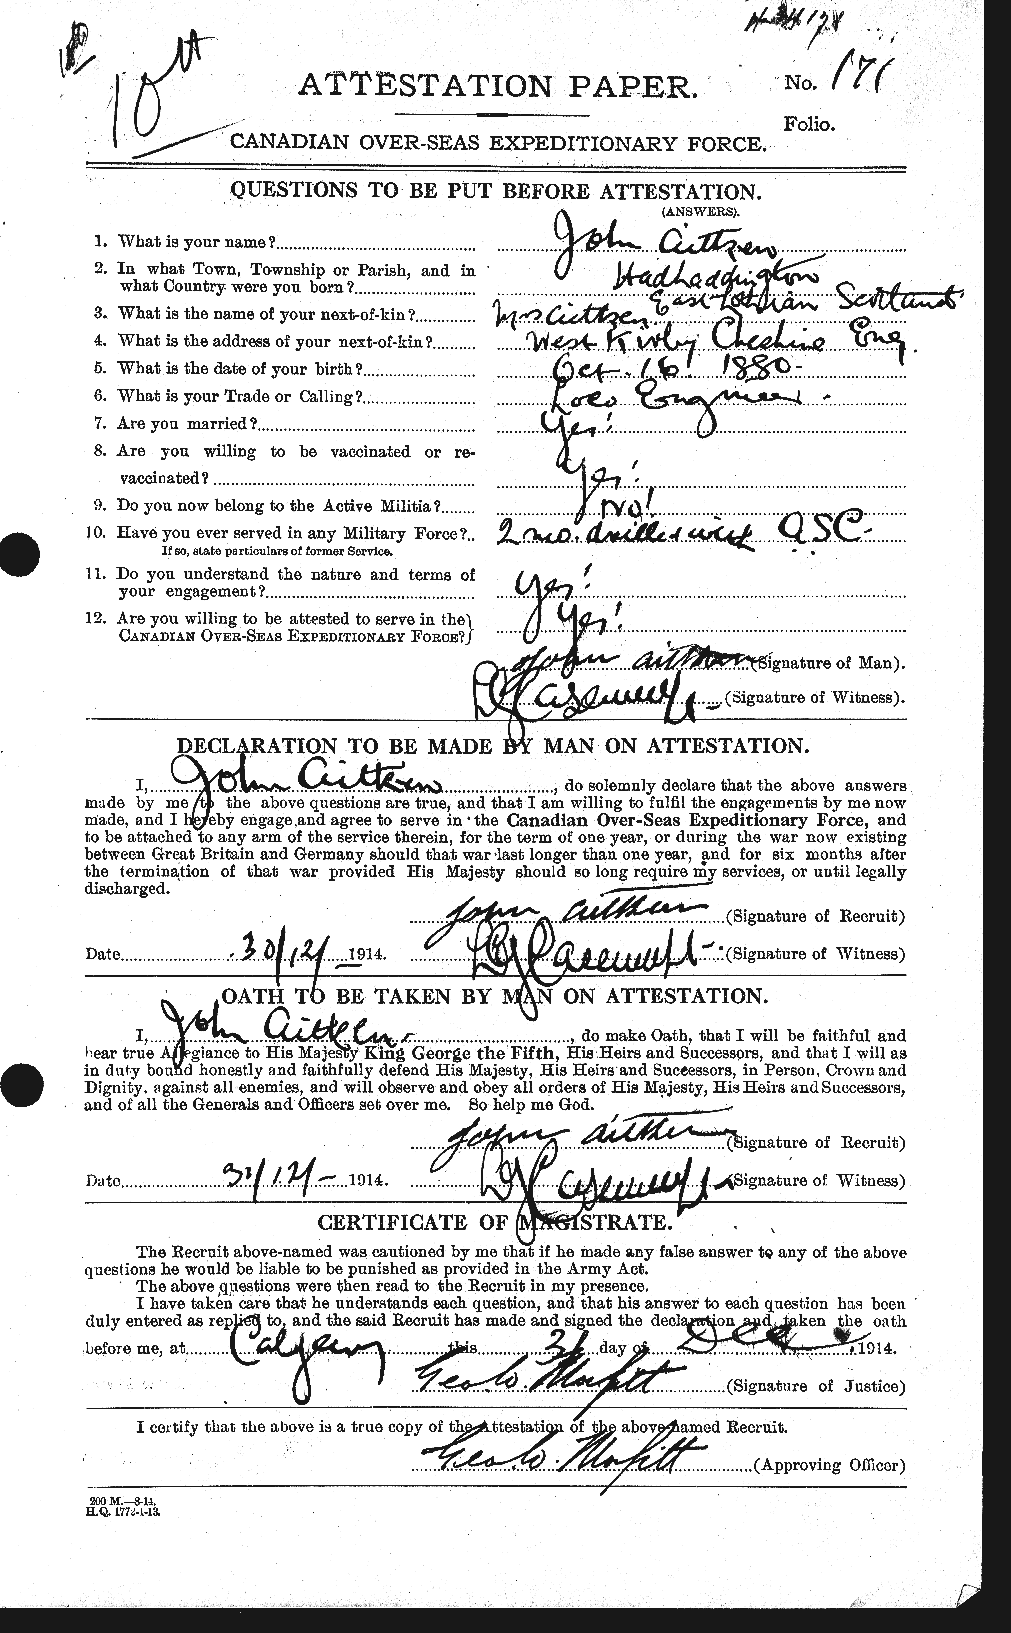 Personnel Records of the First World War - CEF 203399a